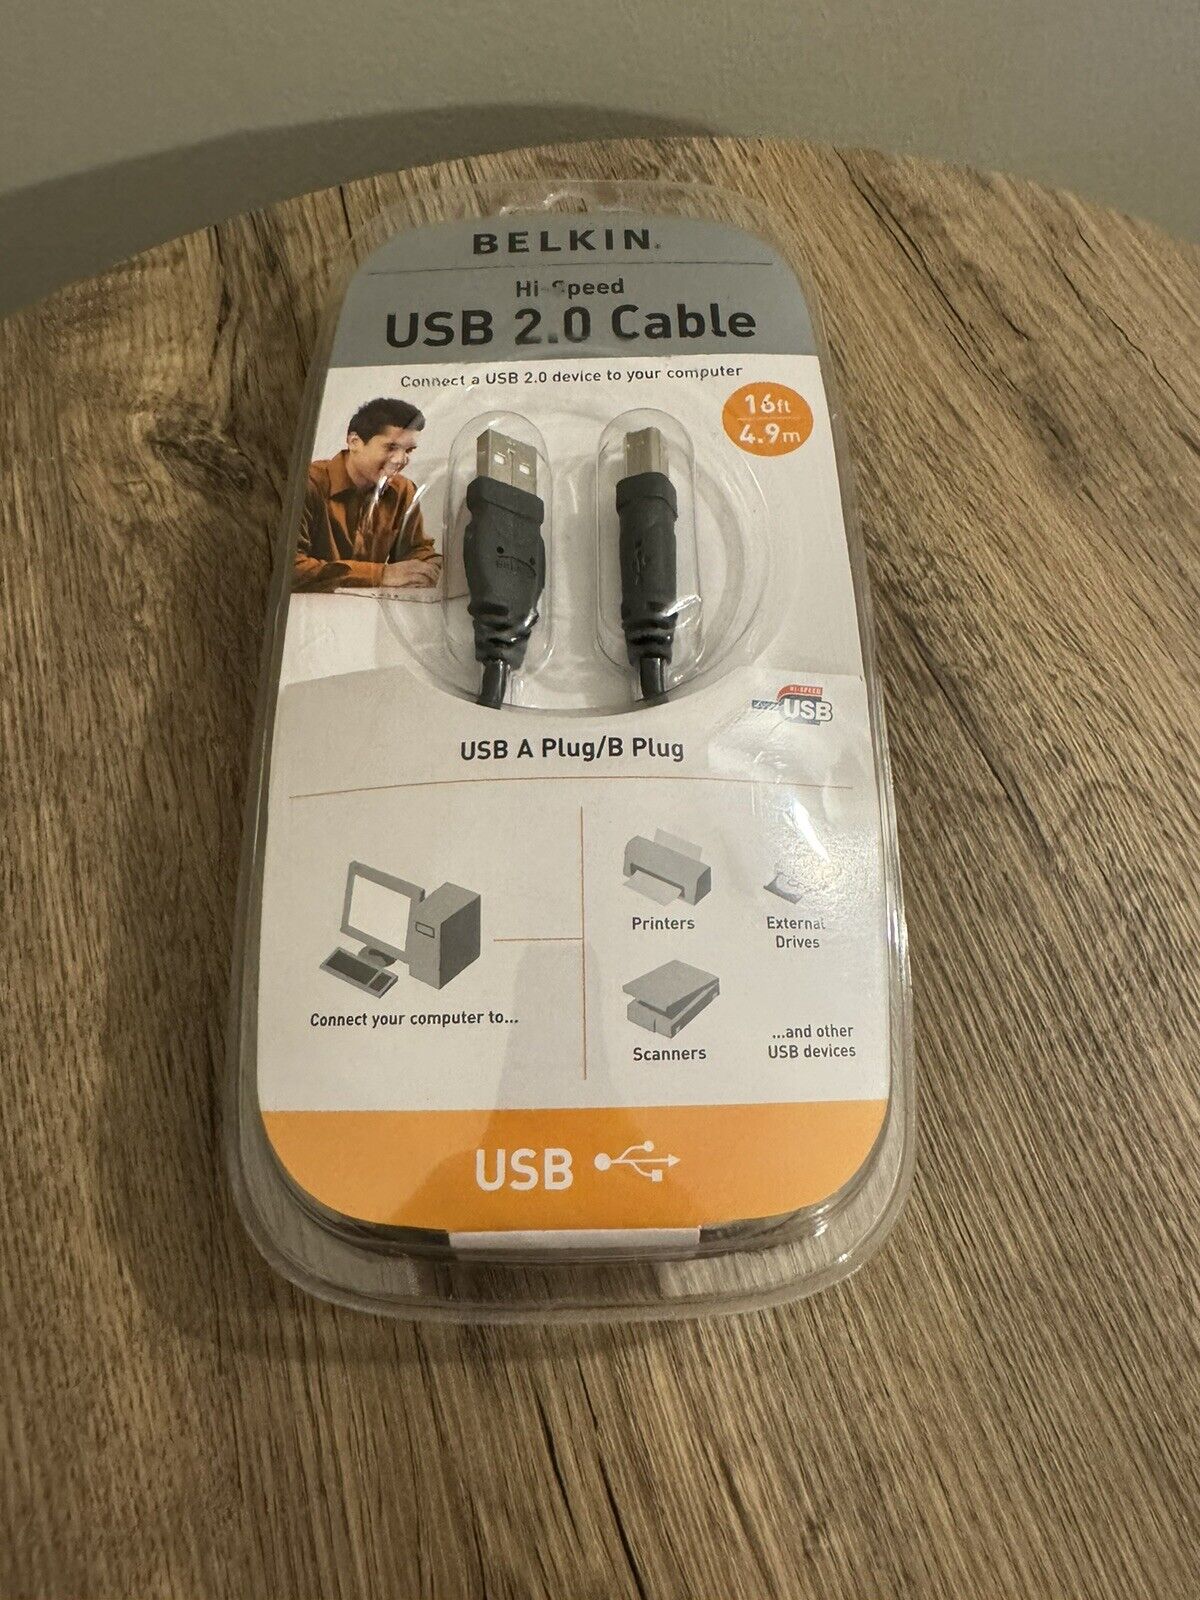 Belkin High Speed USB 2.0 Cable 16ft 4.9m~ NOS sealed Brand New